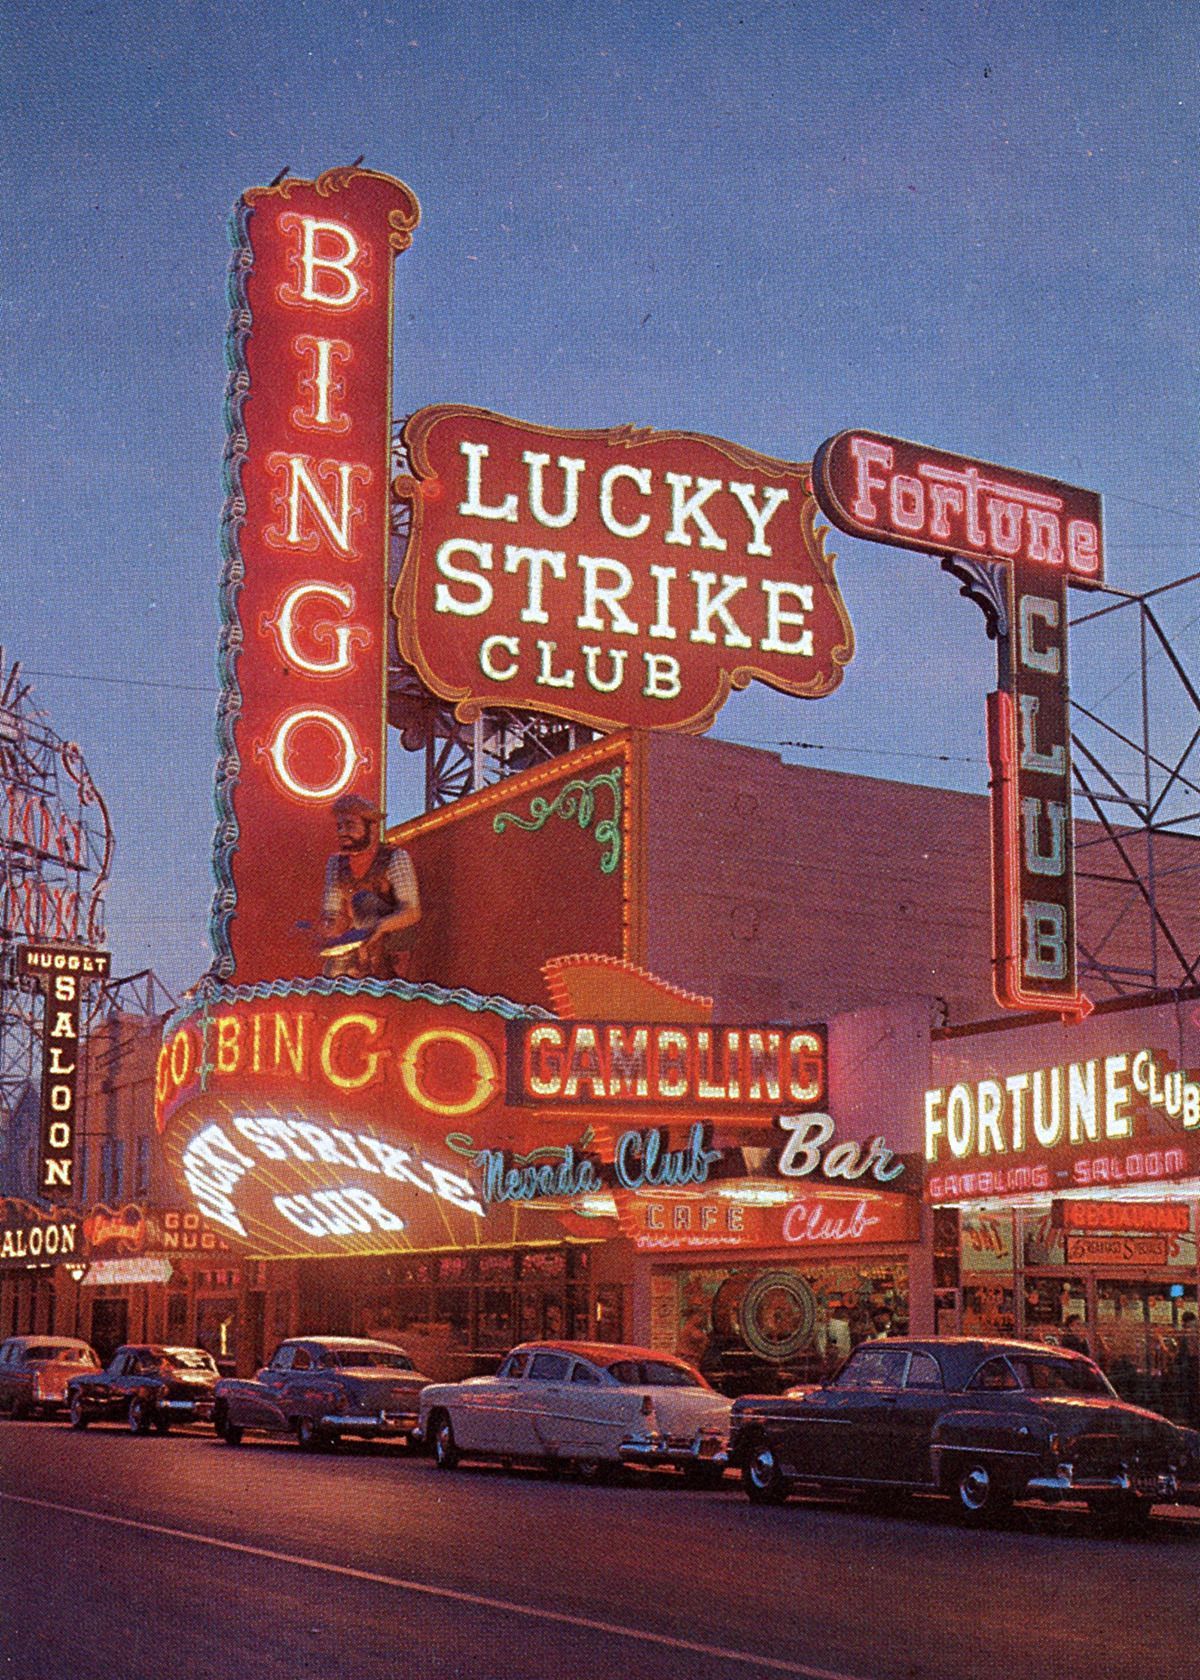 A postcard featuring a red neon sign for the Lucky Strike Club. - Las Vegas